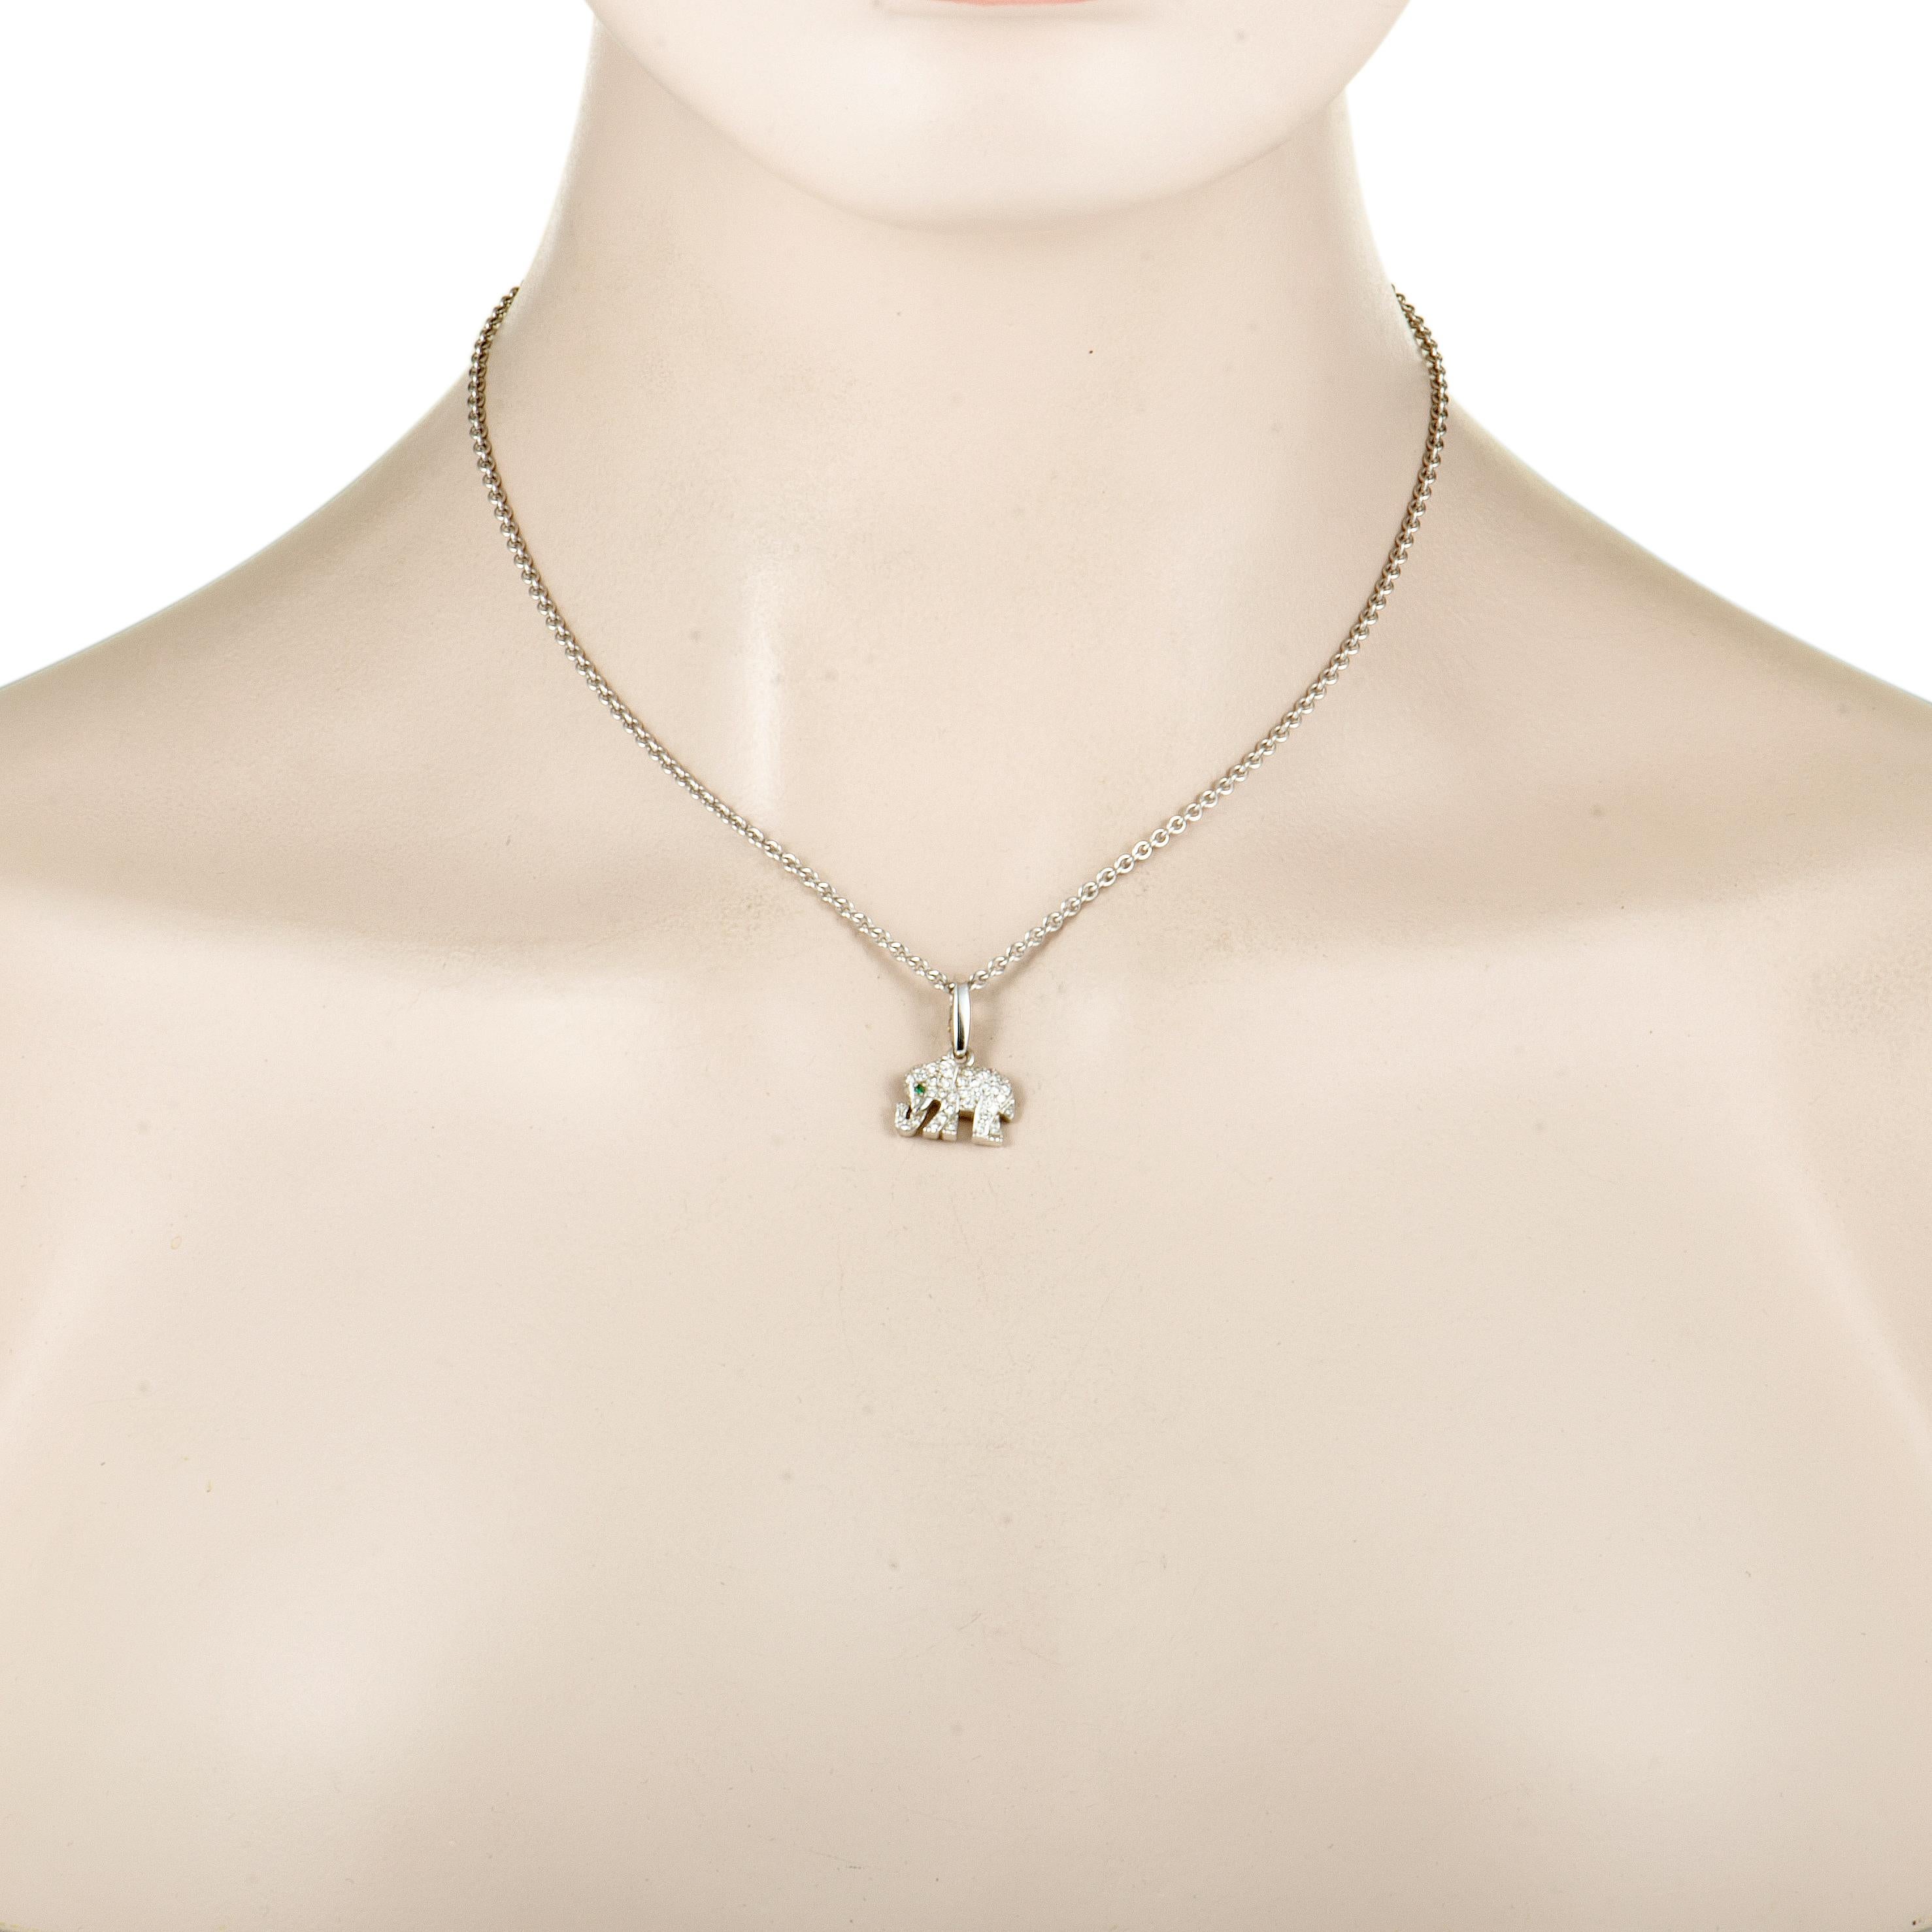 Presented with a stylish rolo chain onto which a gorgeously dainty elephant pendant is attached, this beautiful necklace designed by Cartier offers an incredibly charming look. The necklace is wonderfully made of elegant 18K white gold and